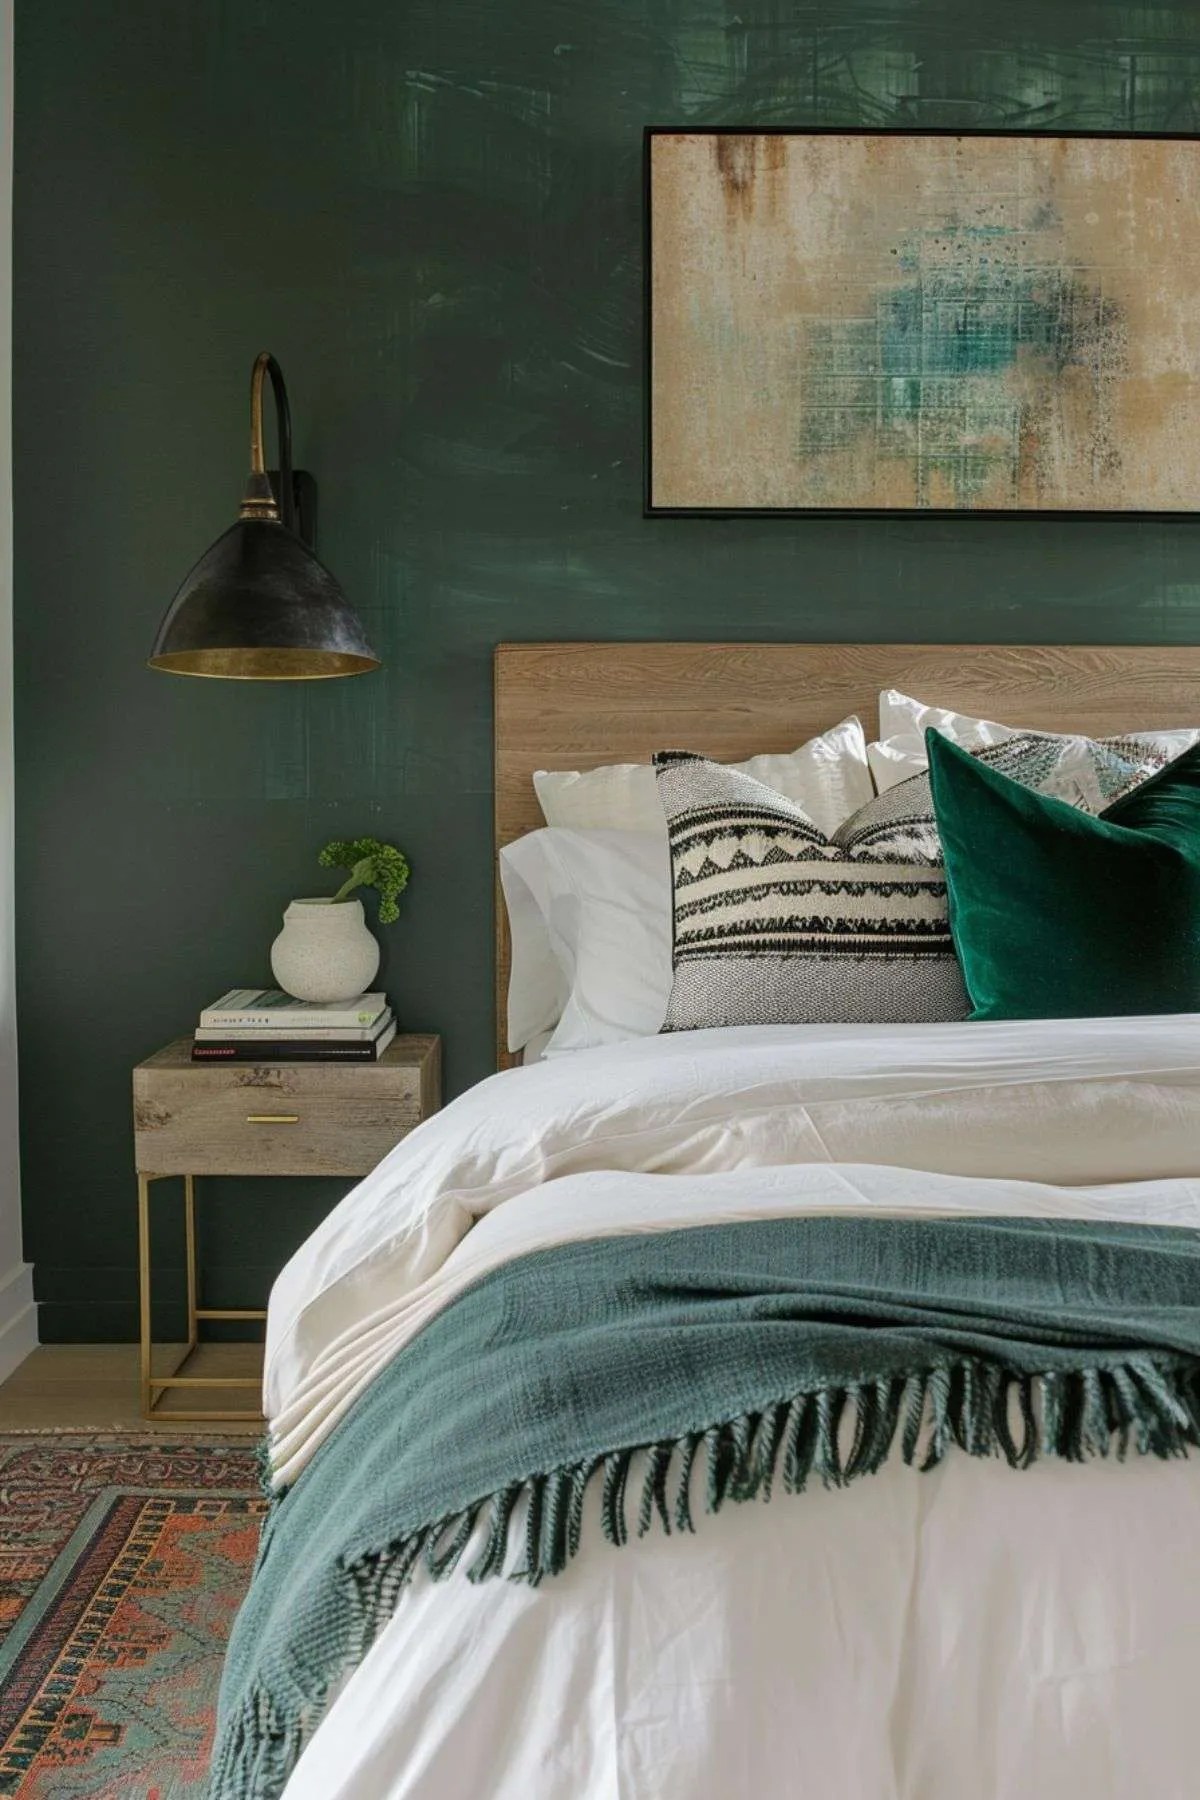 17 Ideas For a Quick Home Bedroom Refresh